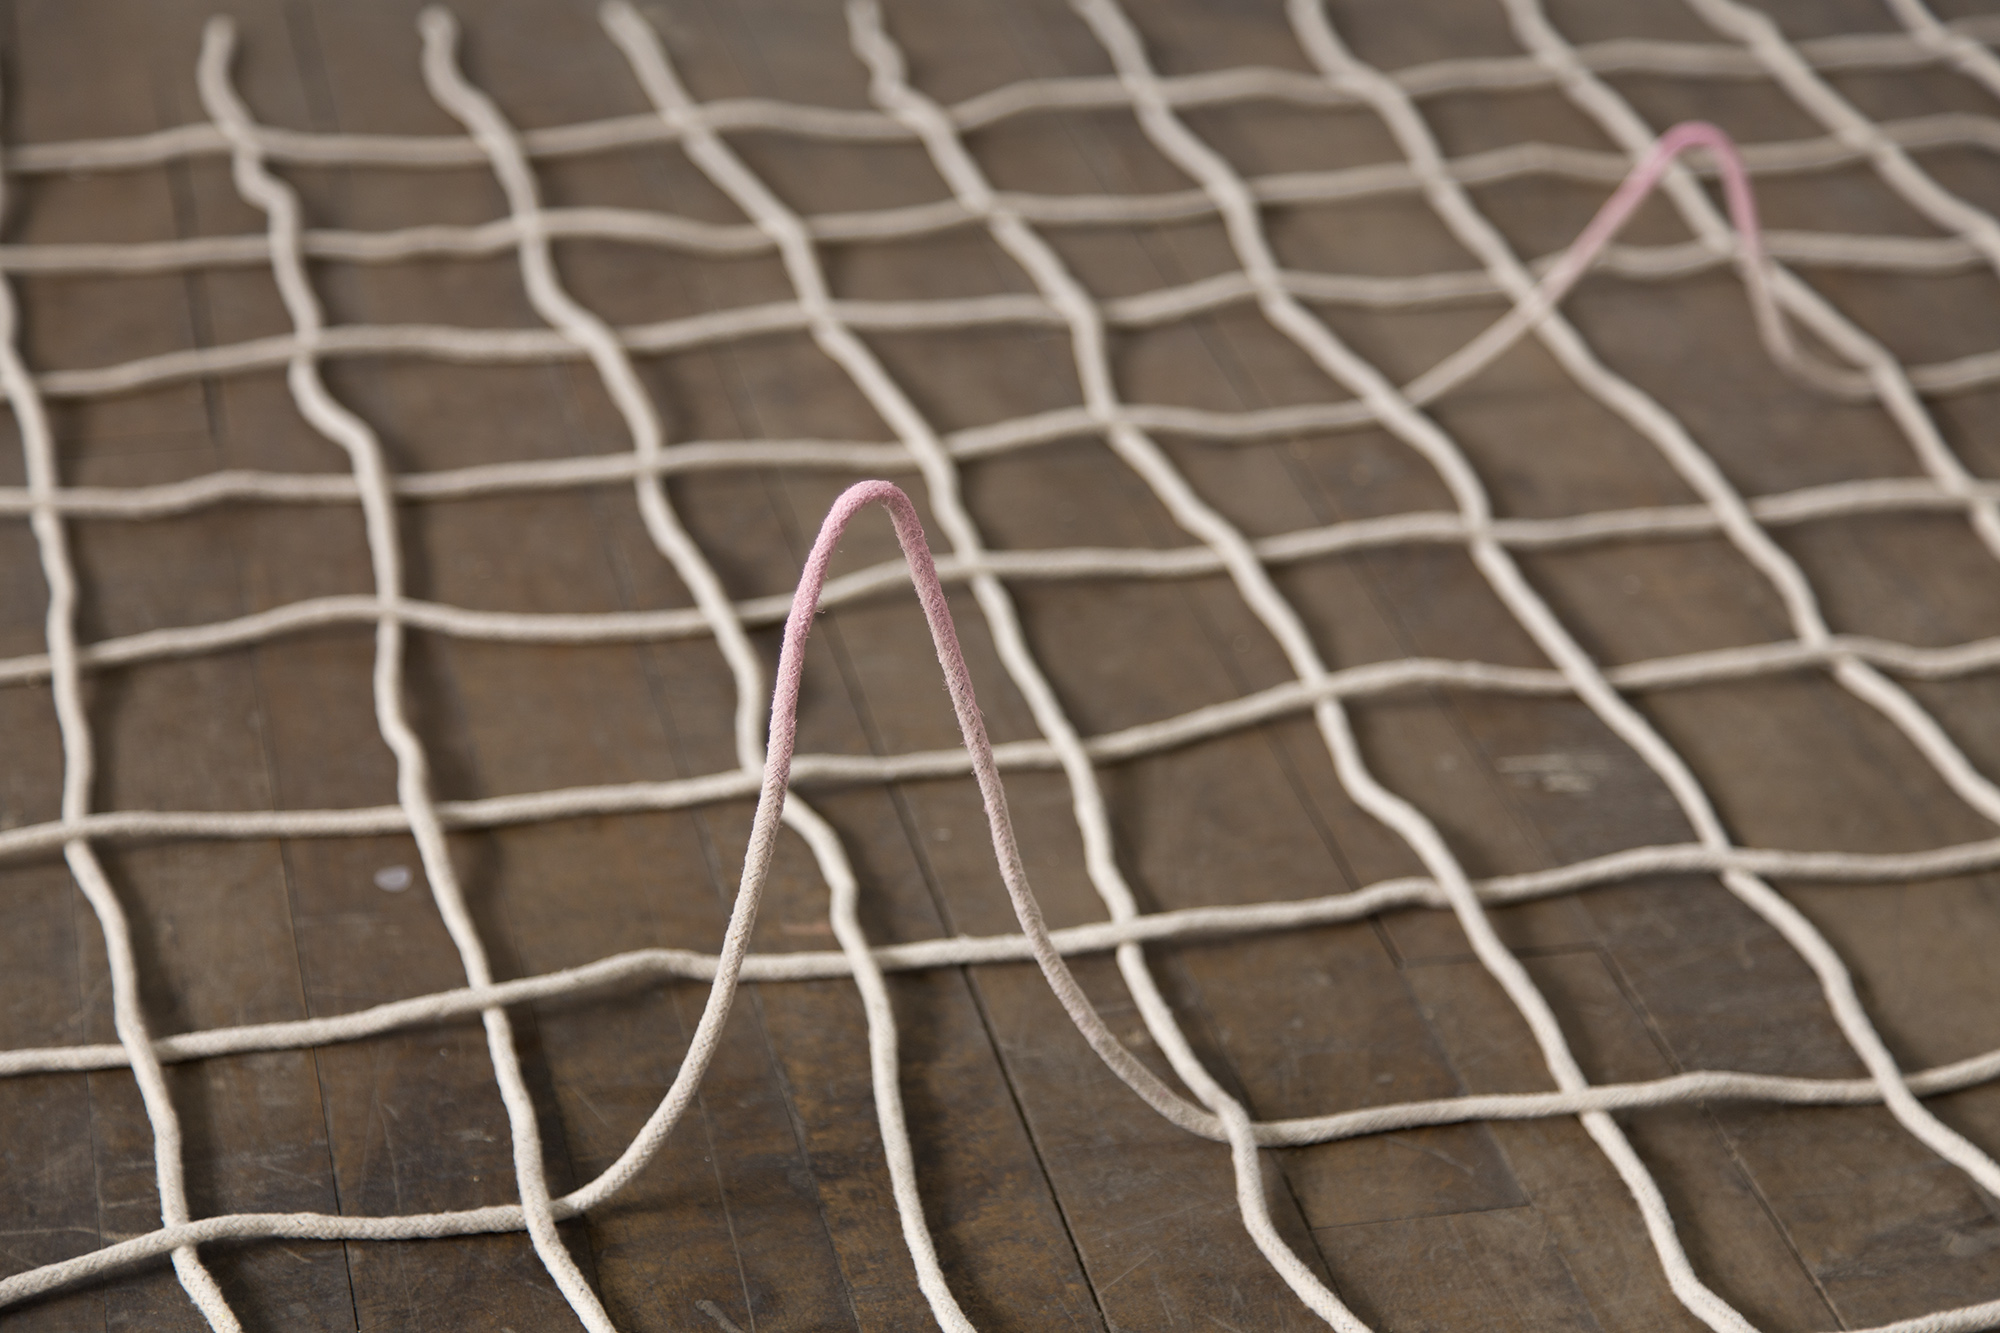 Five Pink Blips (detail), 2015